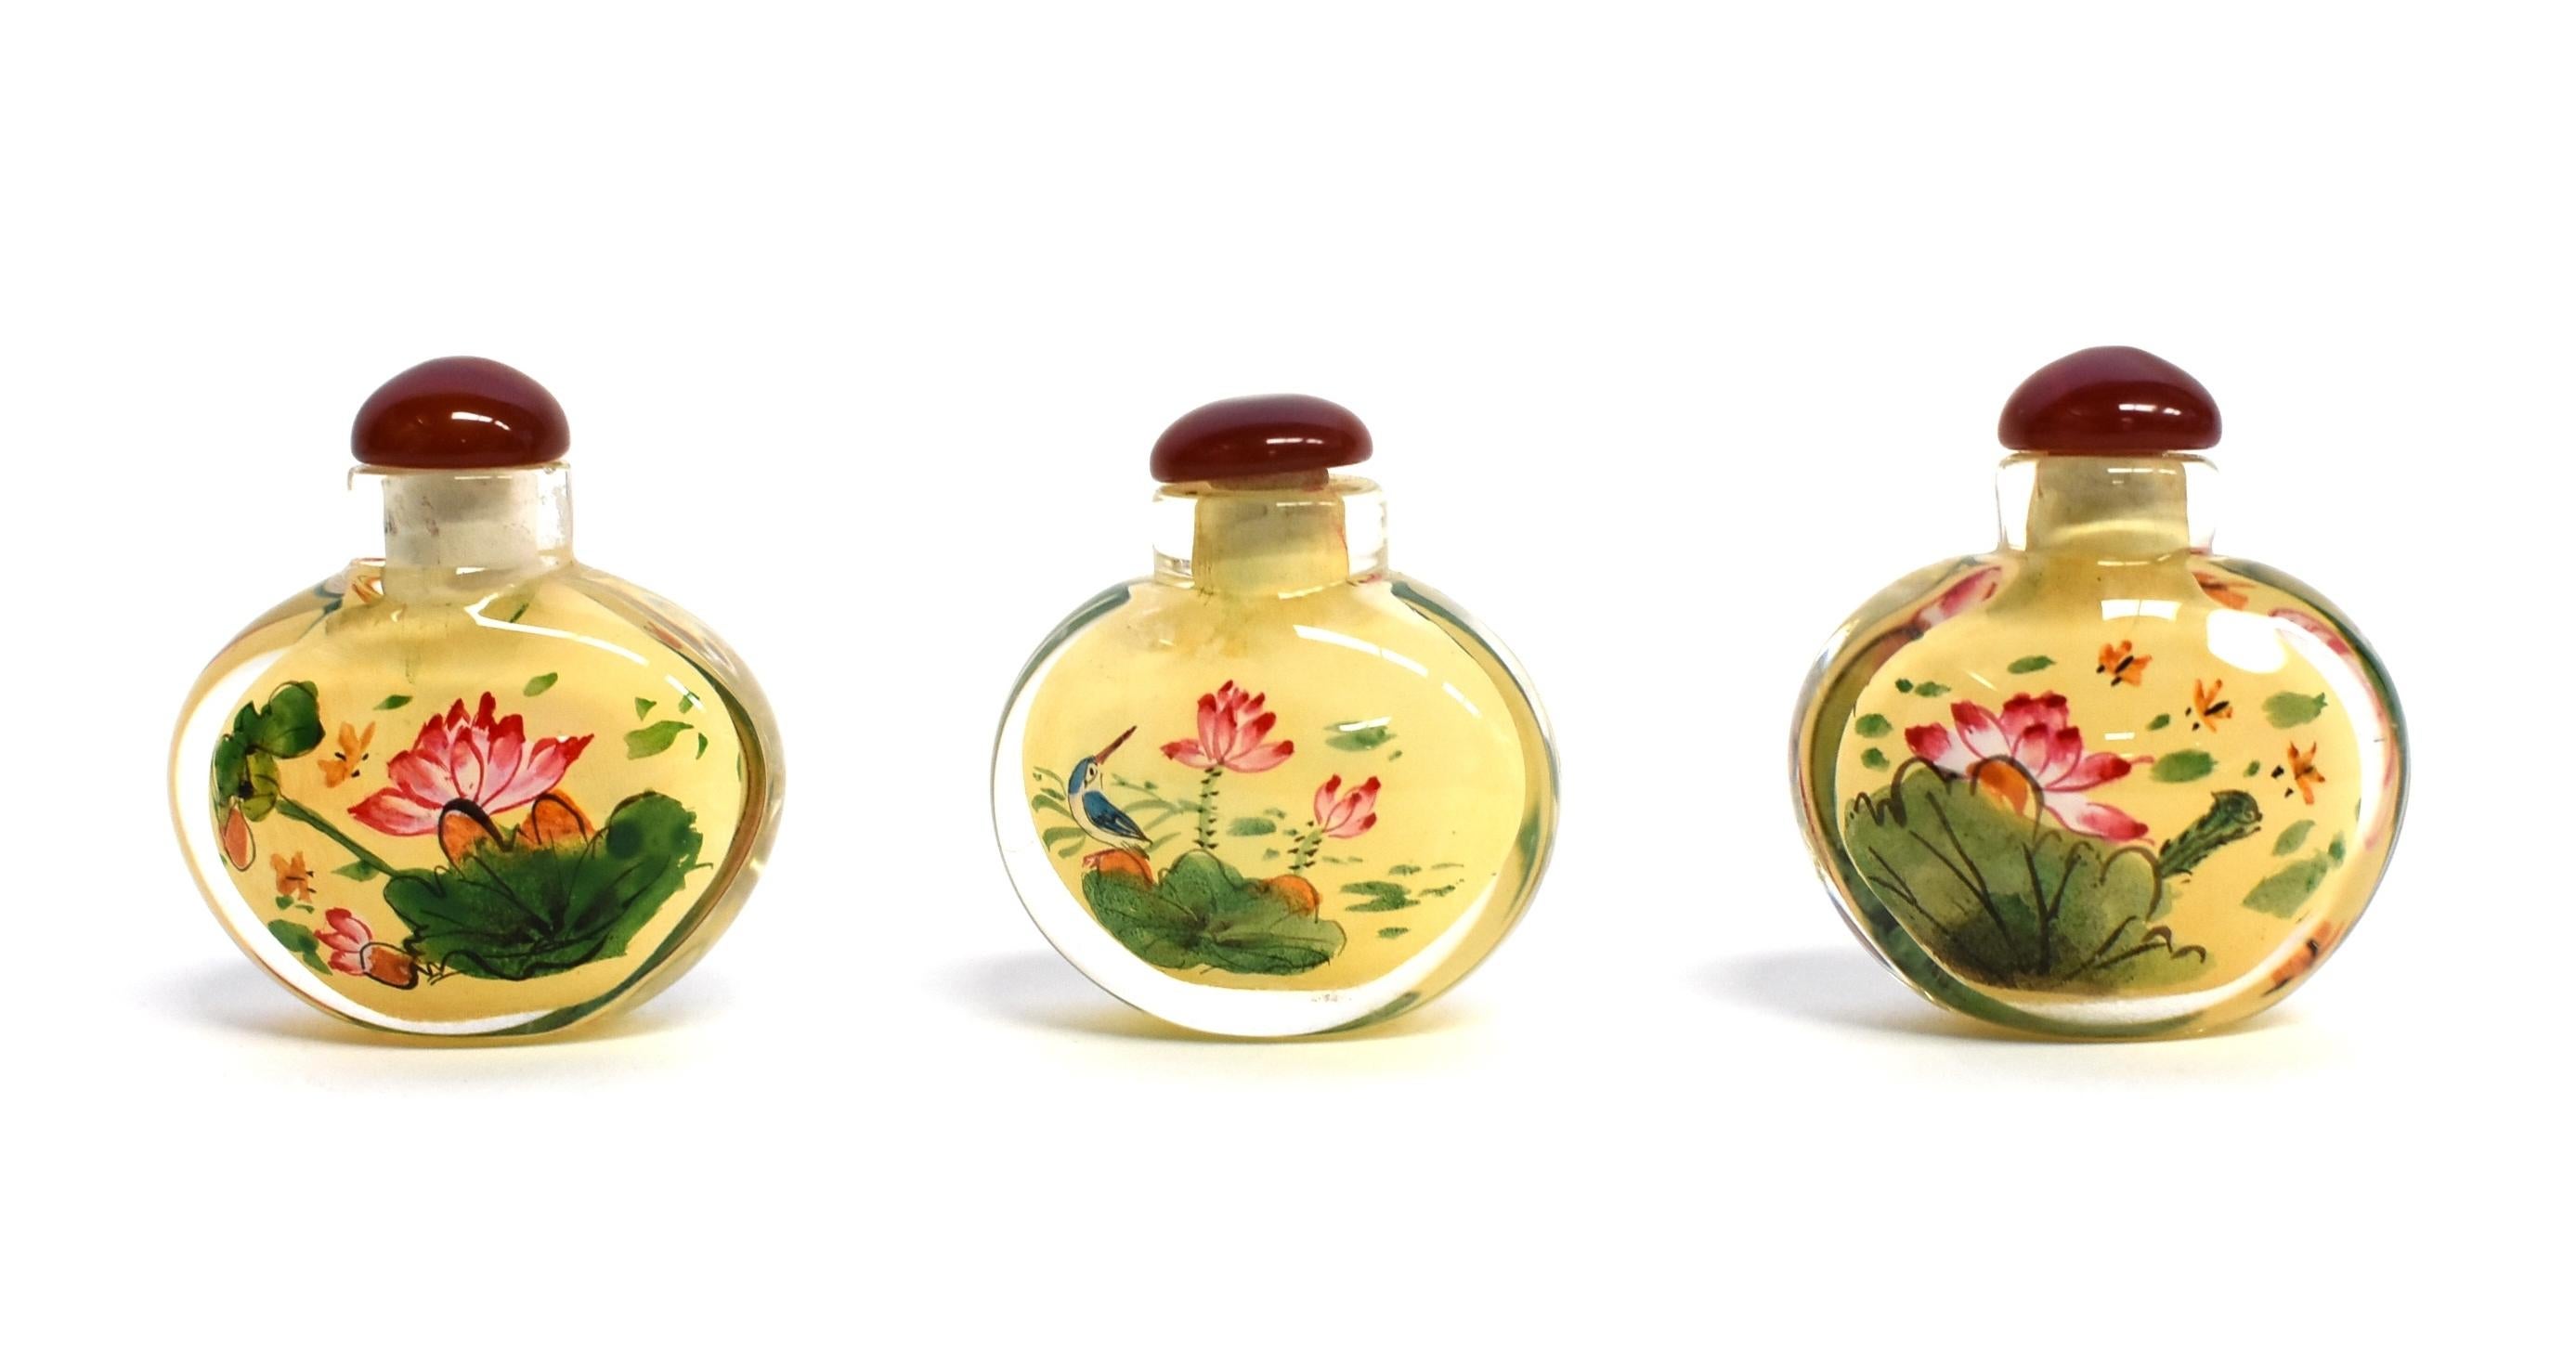 Our snuff bottles are topped with gemstone grade agate lids and 100% hand painted from within. The Chinese art of eglomise uses a very thin bamboo brush with a few strands of hair to apply watercolor on the inside walls of the blank glass bottle